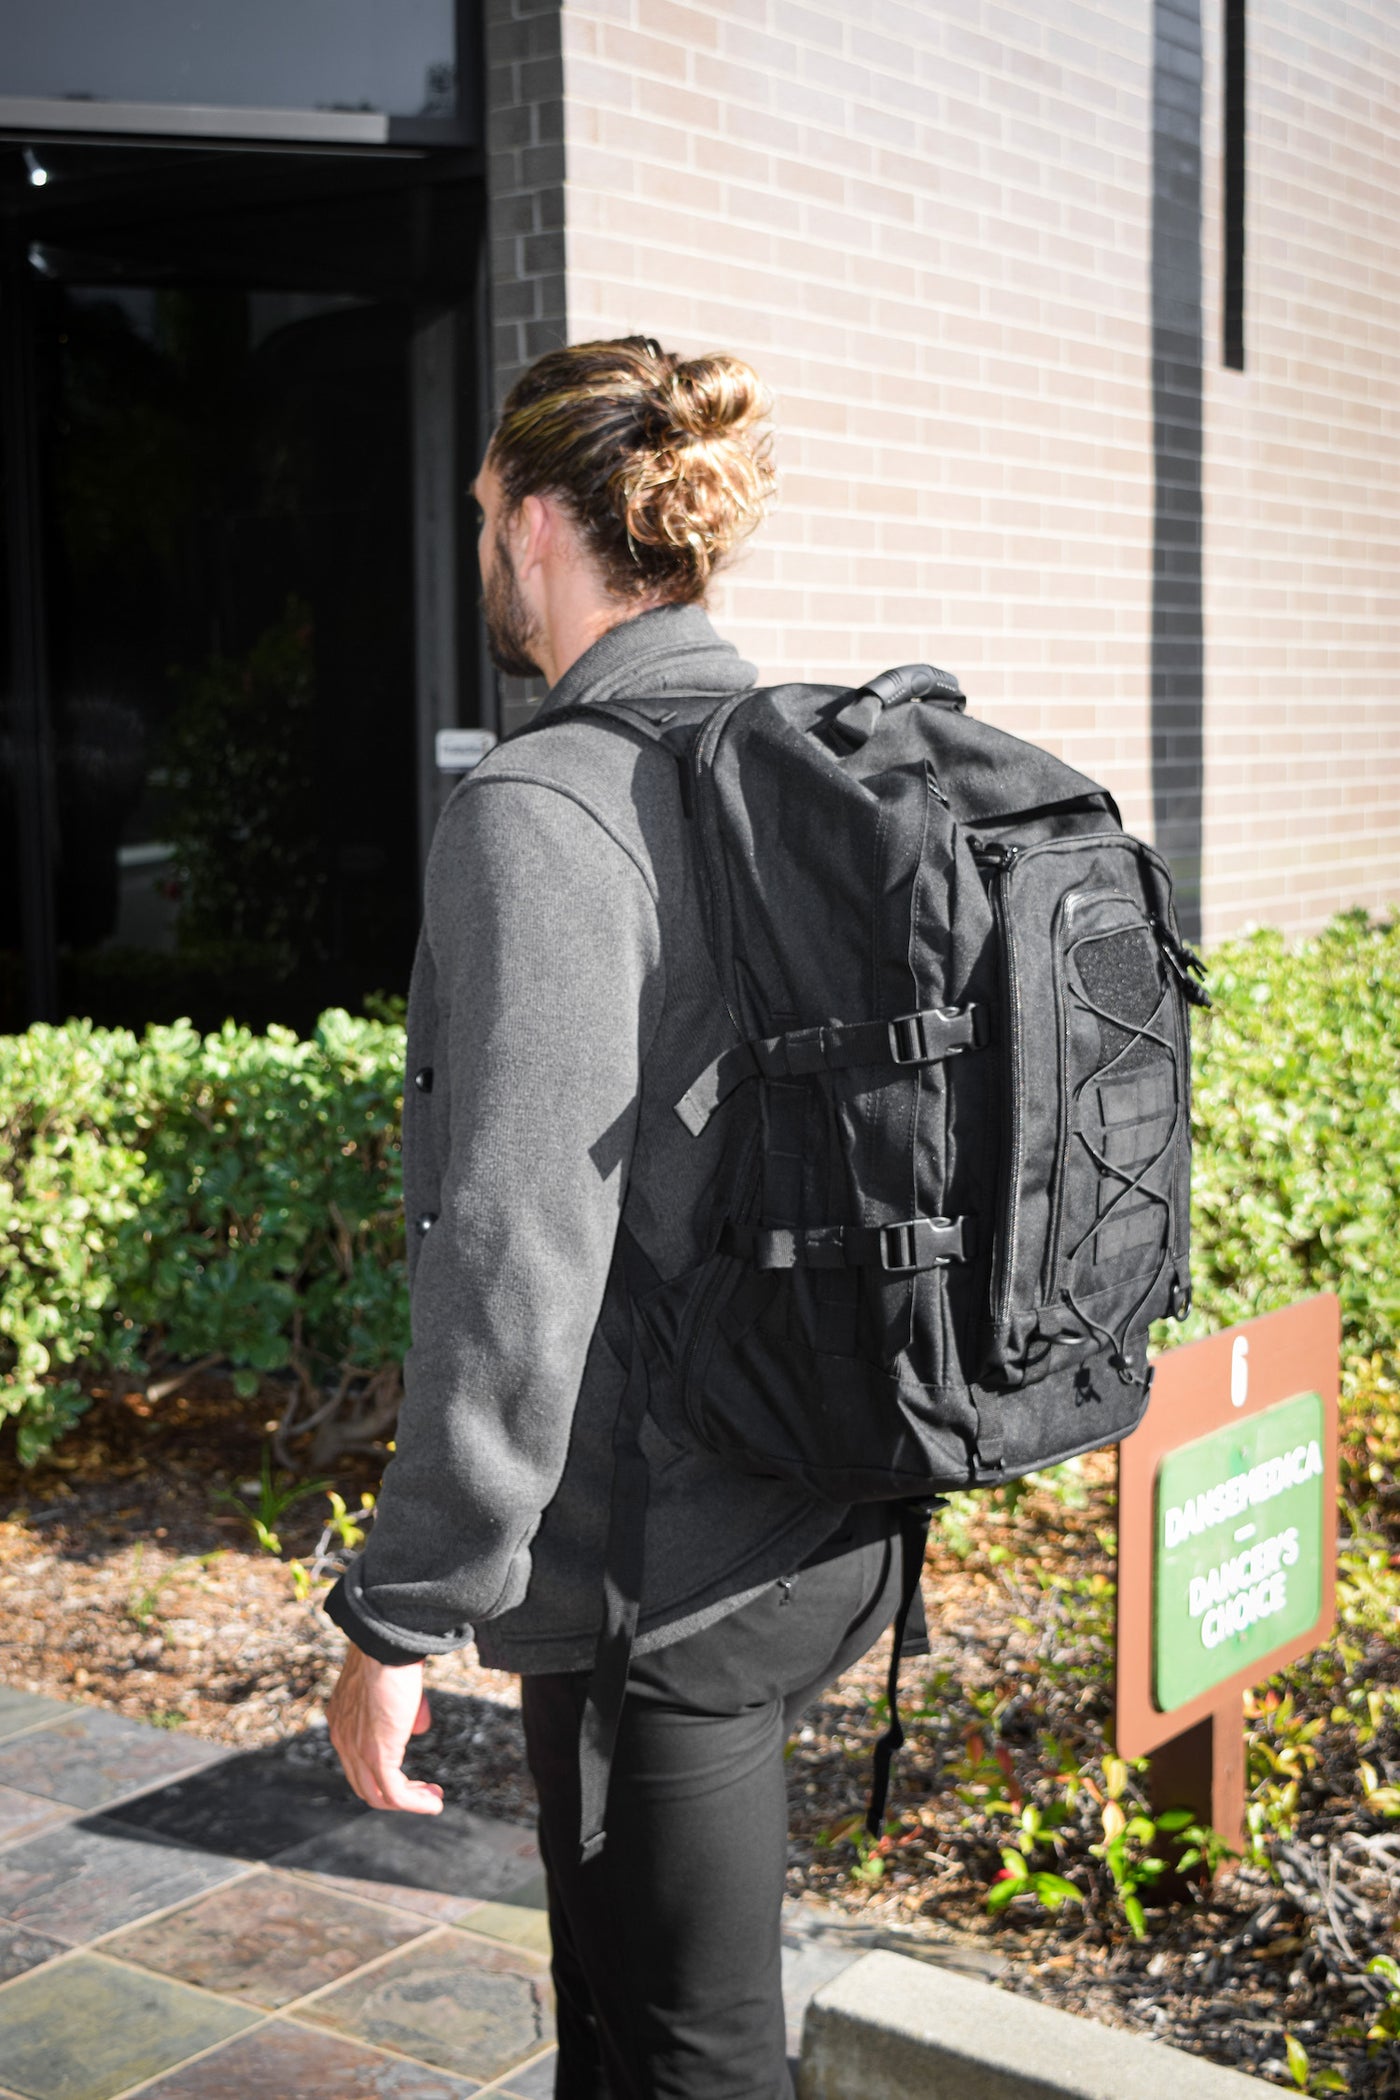 Launch Pad Tactical Carrying Backpack